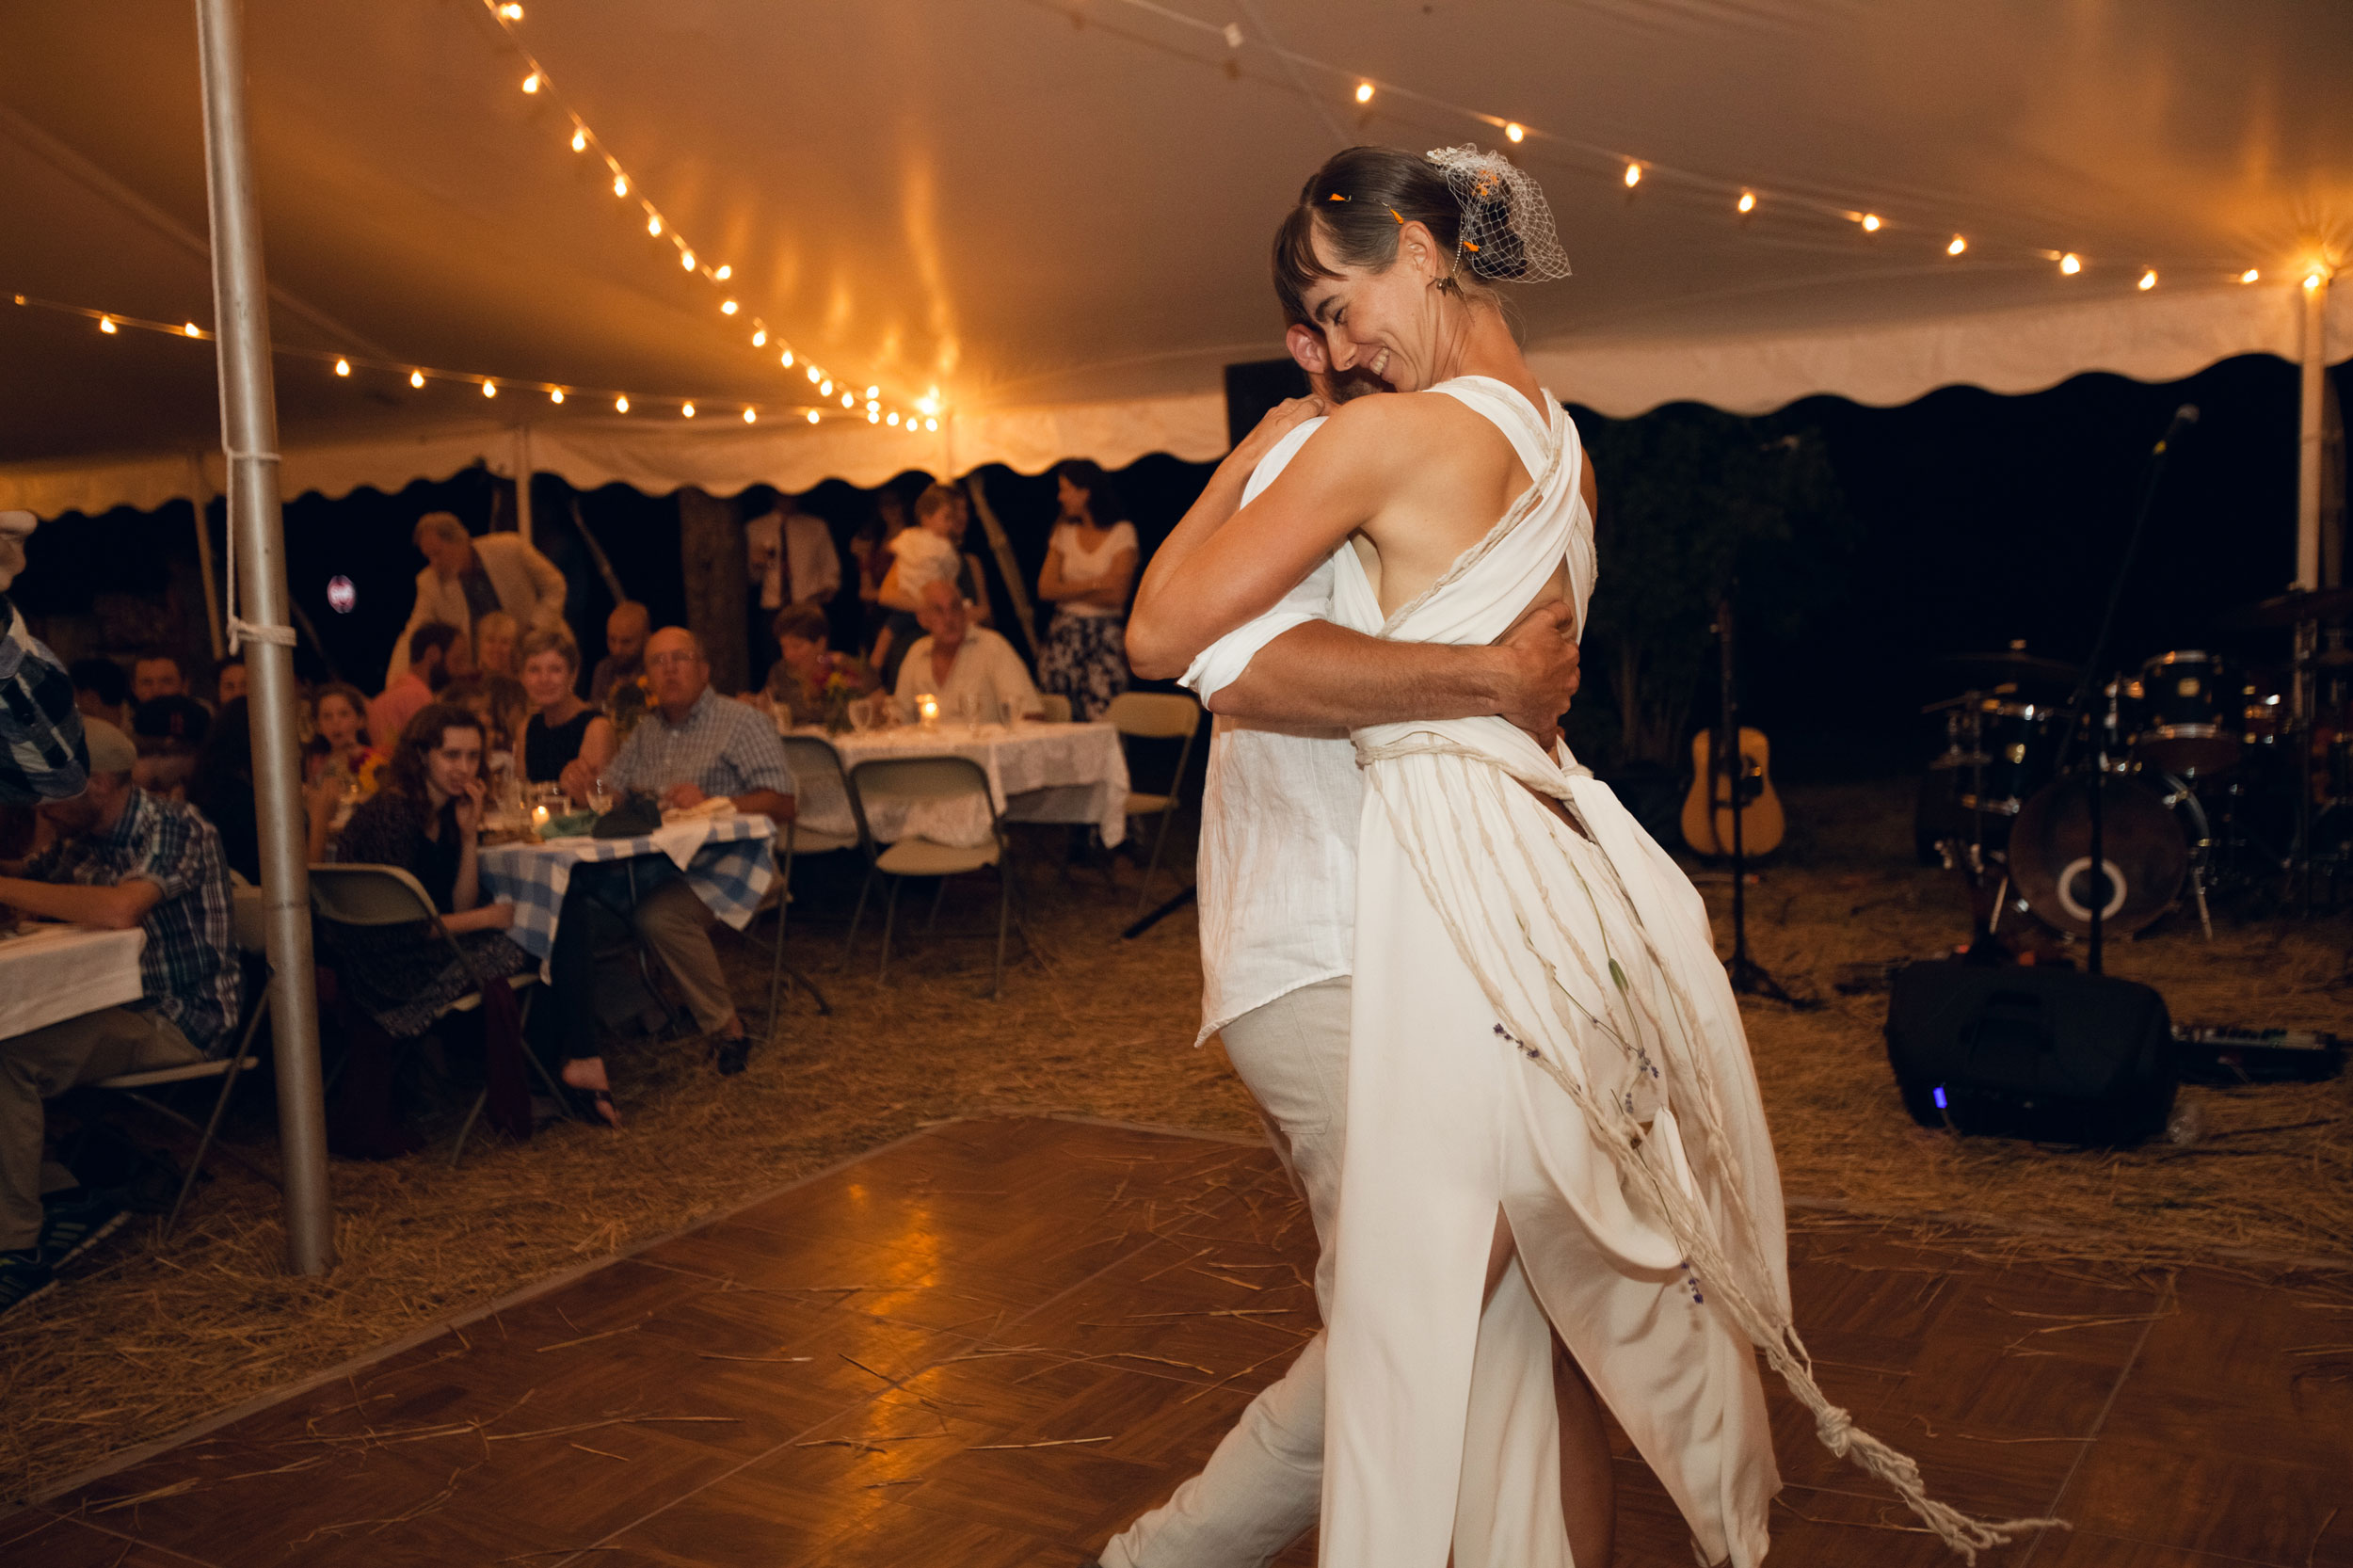 A couple embracing during the first dance at their wedding